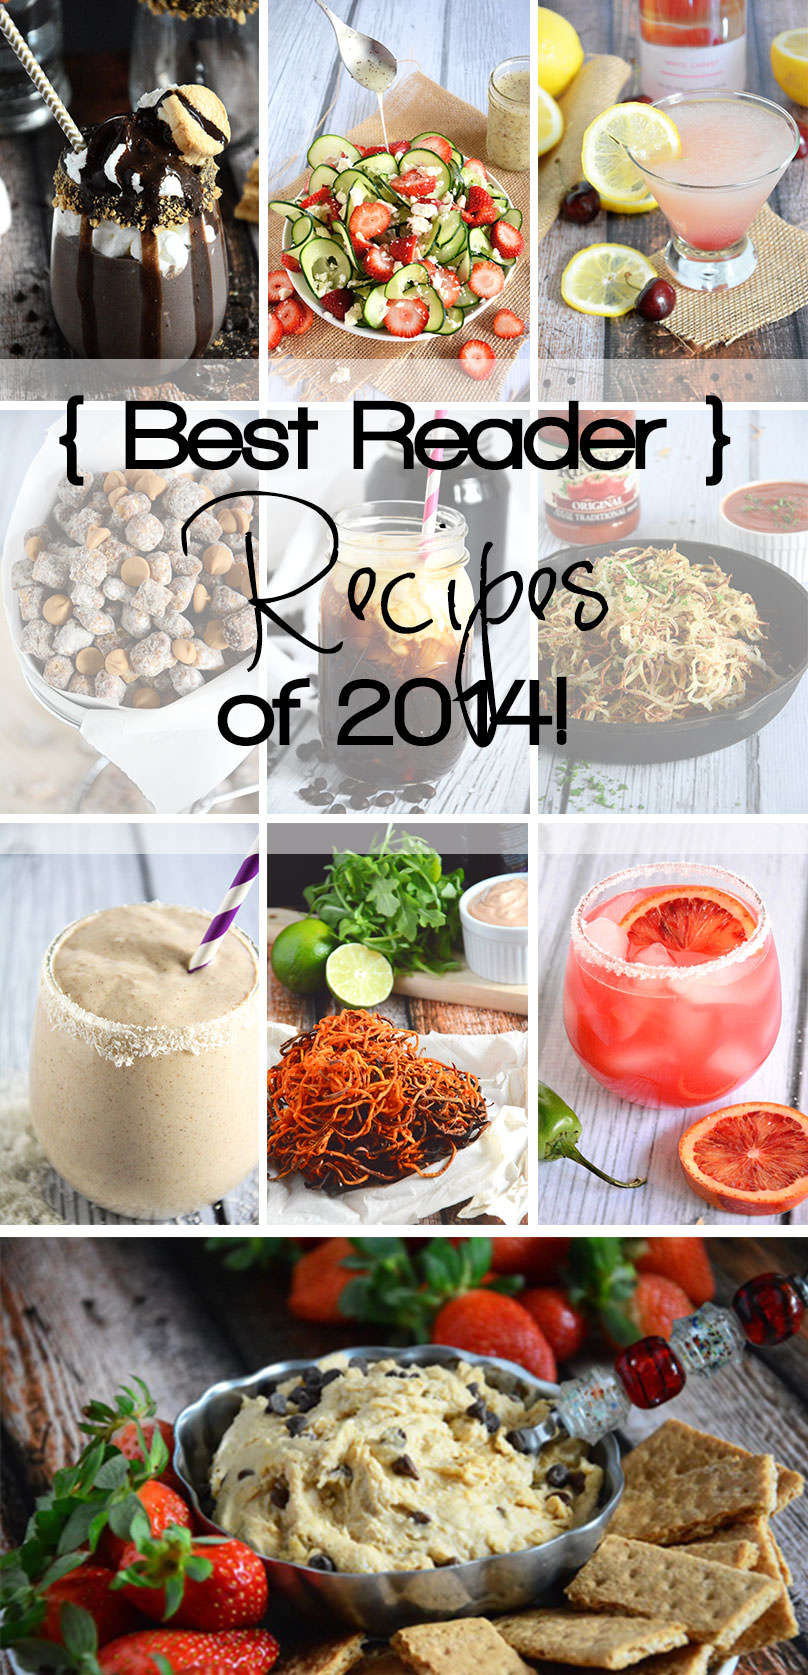 So wrap up the year, I thought to share the most popular reader recipes of 2014 here on The HIT Files. With no further ado; I present to you the best reader recipes of 2014! Enjoy!